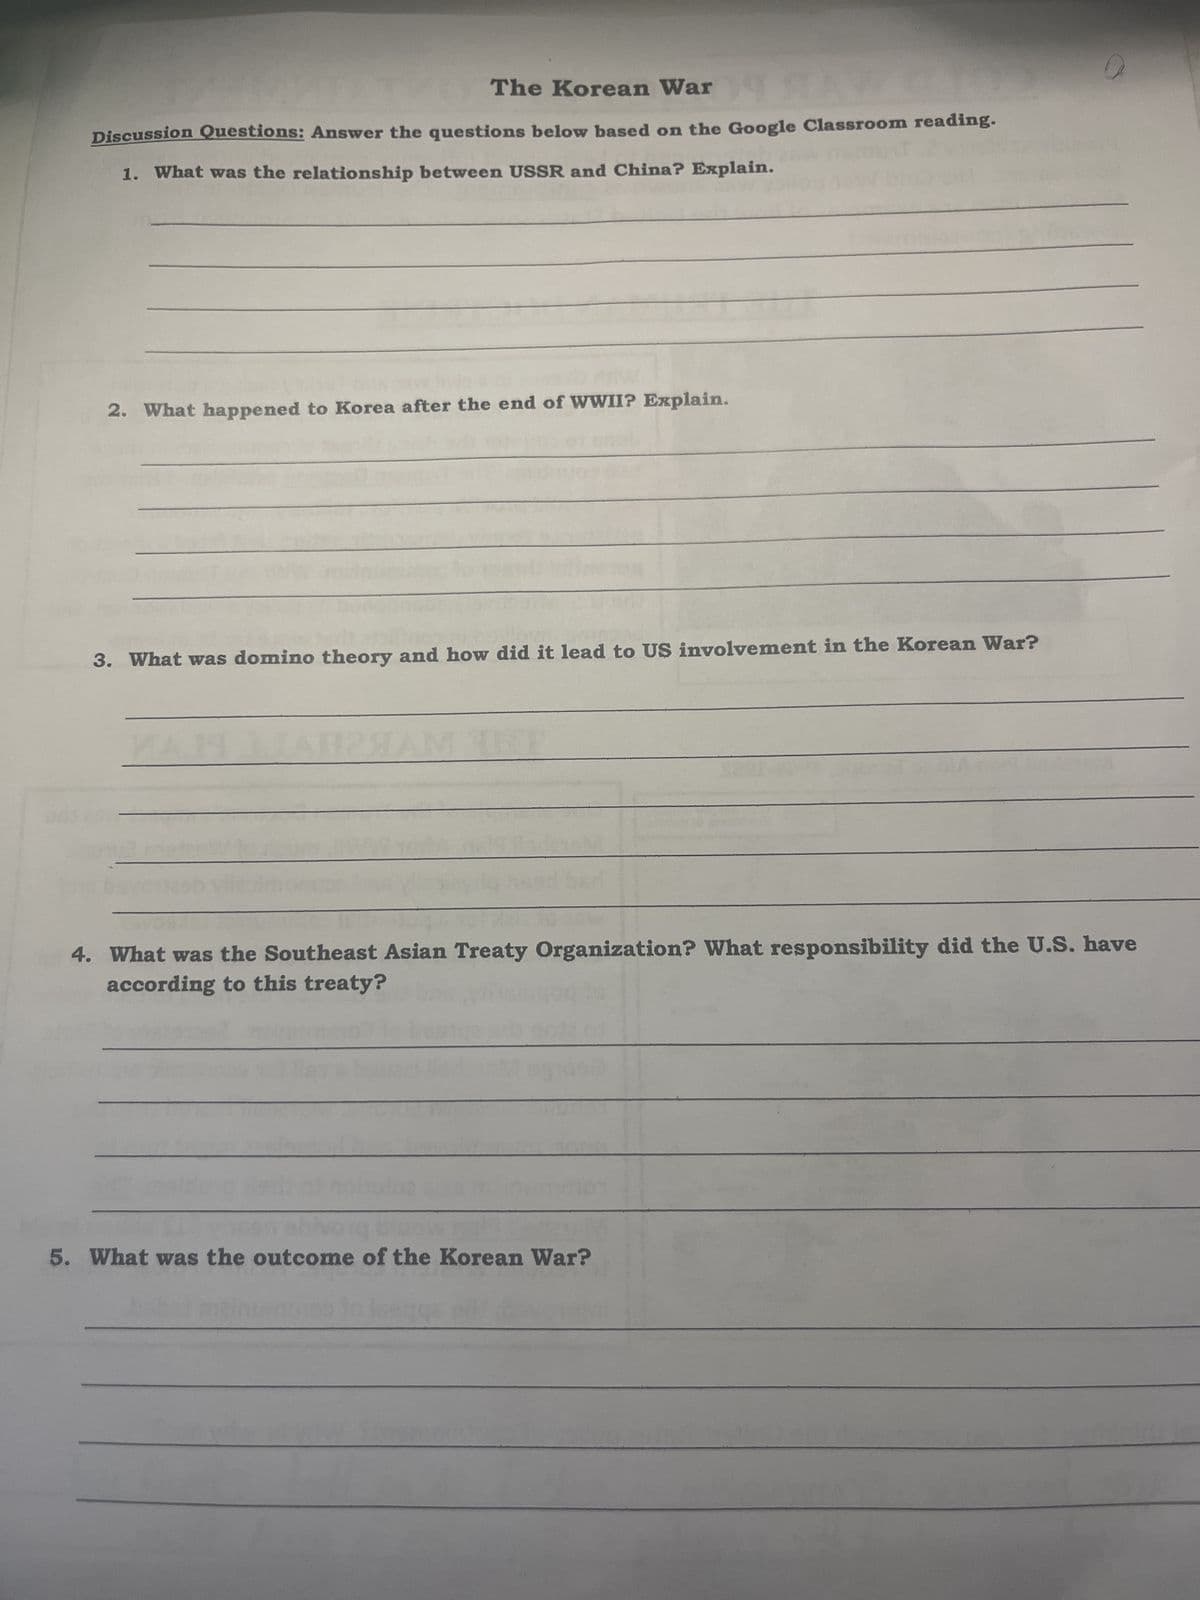 The Korean War
SAY
Discussion Questions: Answer the questions below based on the Google Classroom reading.
1. What was the relationship between USSR and China? Explain.
2. What happened to Korea after the end of WWII? Explain.
3. What was domino theory and how did it lead to US involvement in the Korean War?
ДАПРЯАМА
4. What was the Southeast Asian Treaty Organization? What responsibility did the U.S. have
according to this treaty?
5. What was the outcome of the Korean War?